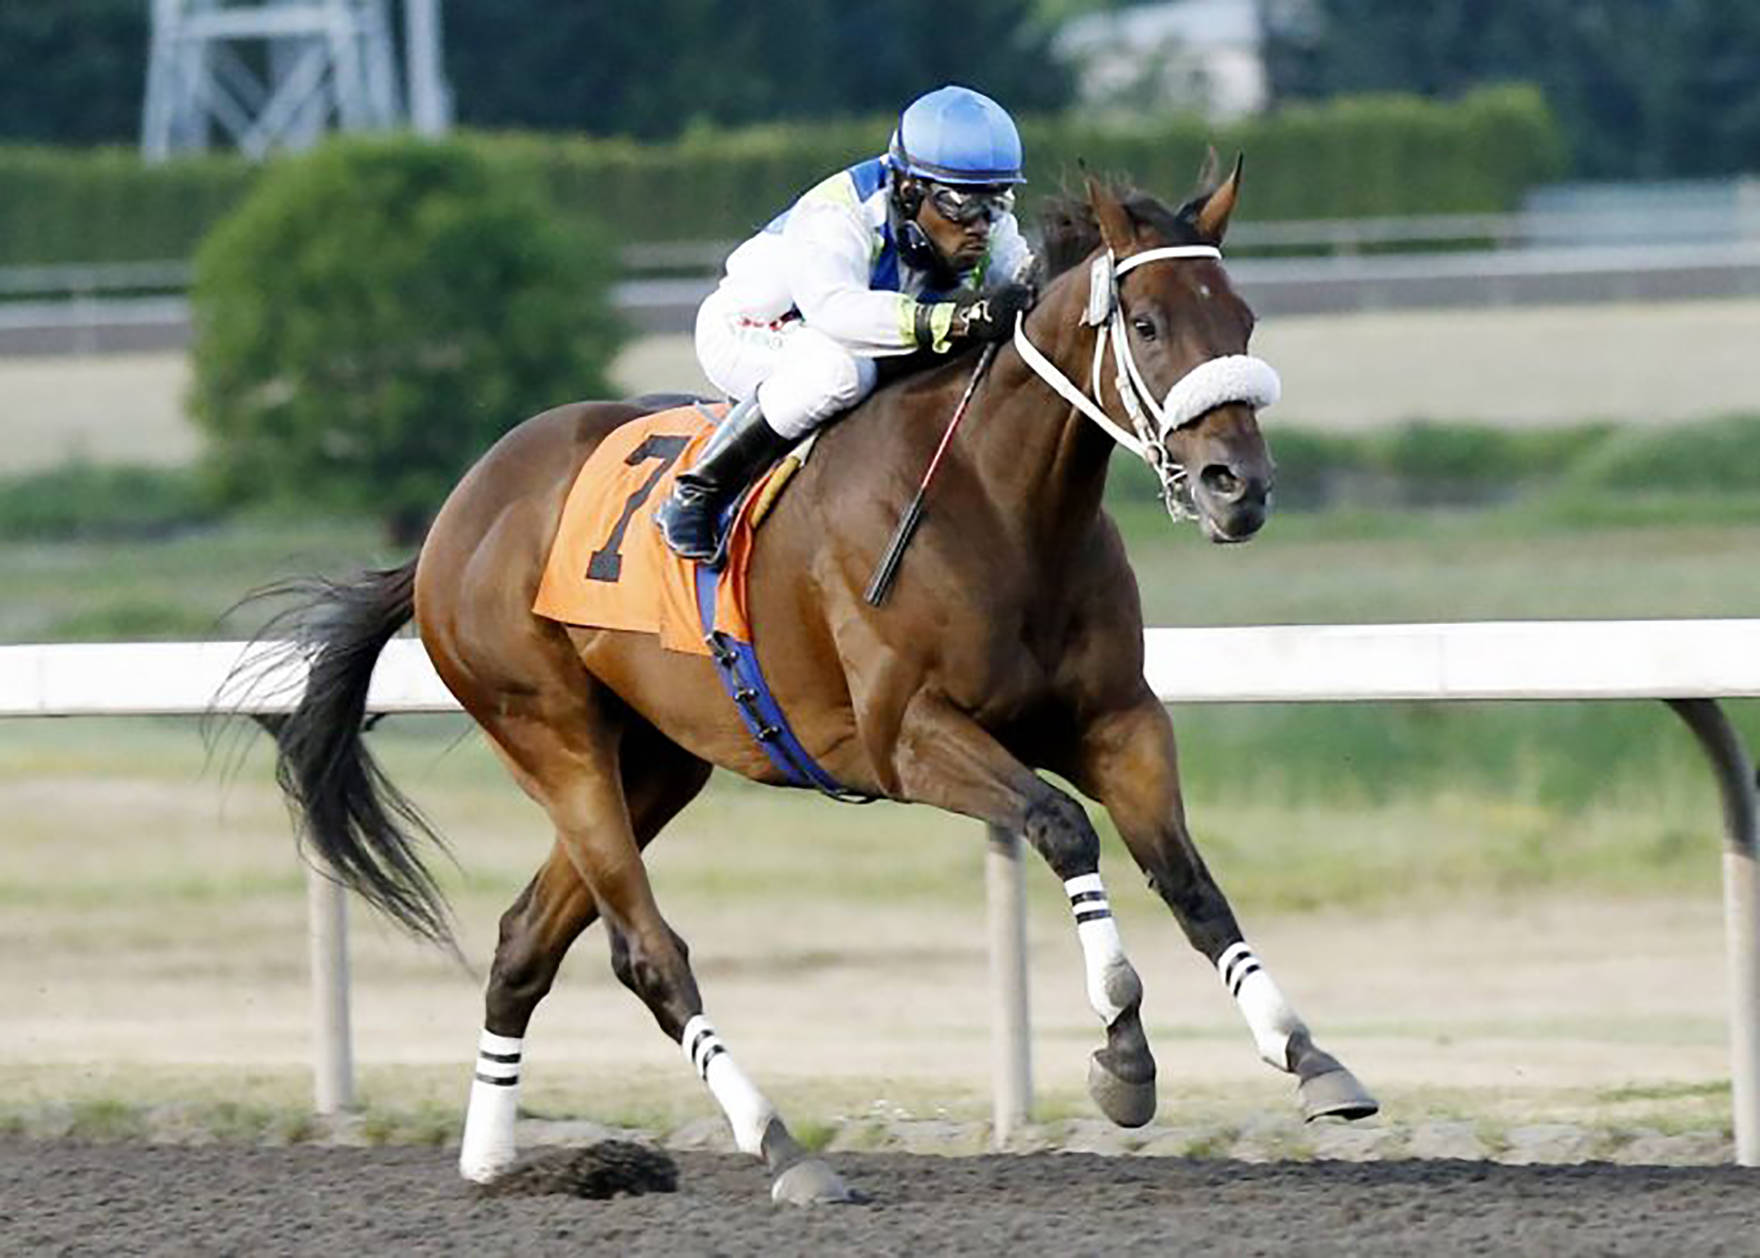 Mike Man’s Gold, with Rocco Bowen in the saddle, rolled to victory in the $15,600 Rotary Club of South Tacoma Purse at Emerald Downs on Friday. The 7-year-old gelding has won all three of his starts this meet and leads active horses with 15 career wins at the Auburn track. COURTESY PHOTO, Emerald Downs